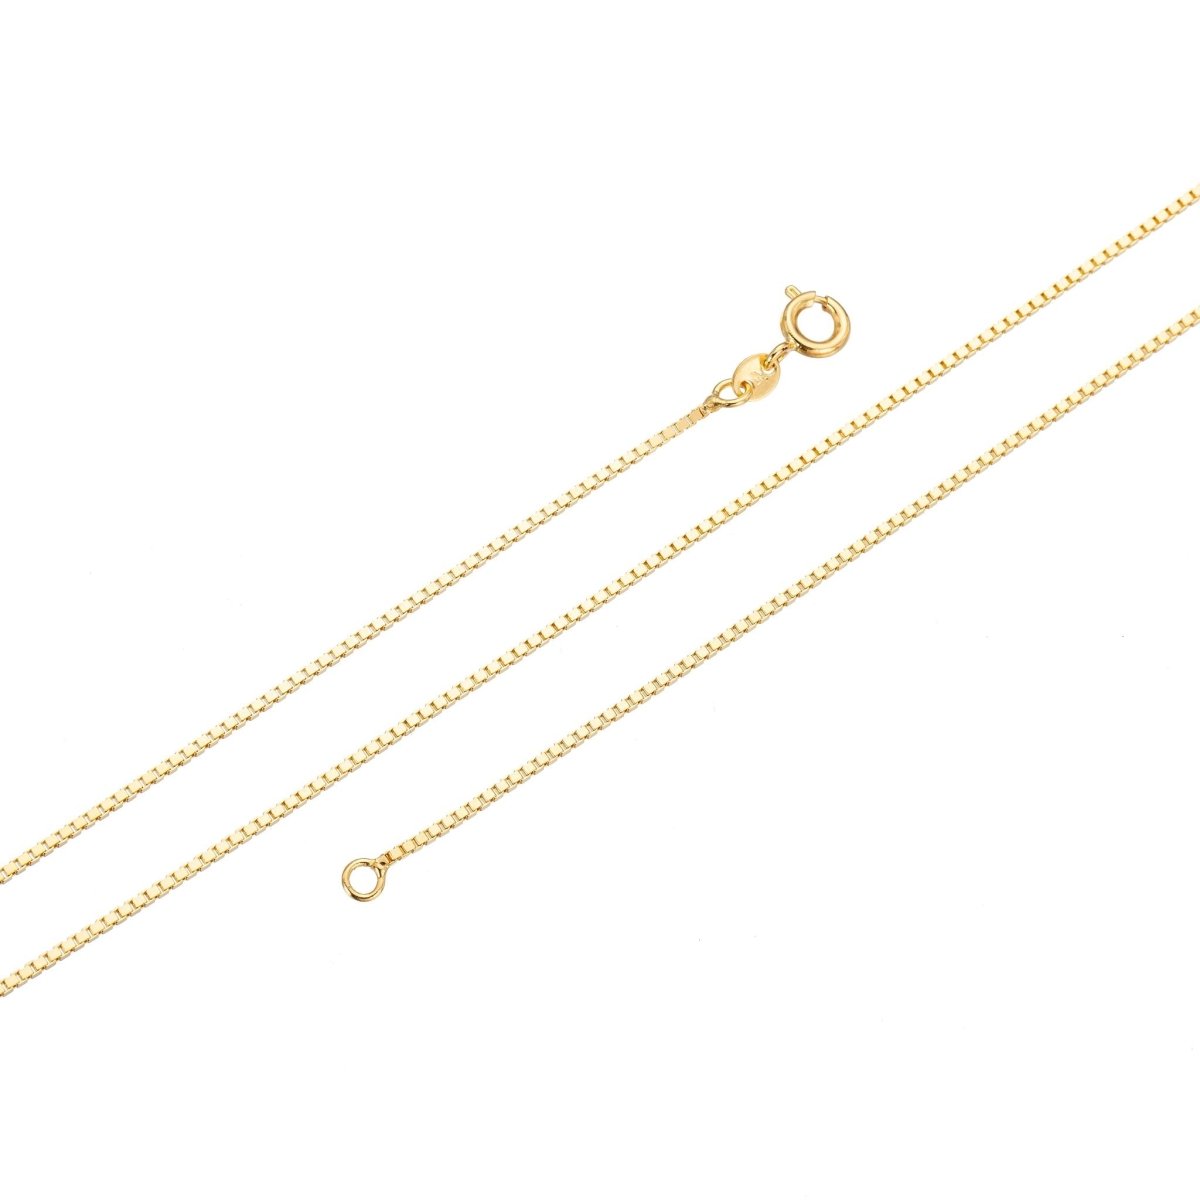 24K Gold Filled Box Chain Necklace, 17.5 inch Box Finished Necklace For Jewelry Making, Dainty 1.1mm Box Necklace w/ Spring Ring | CN-294 - DLUXCA